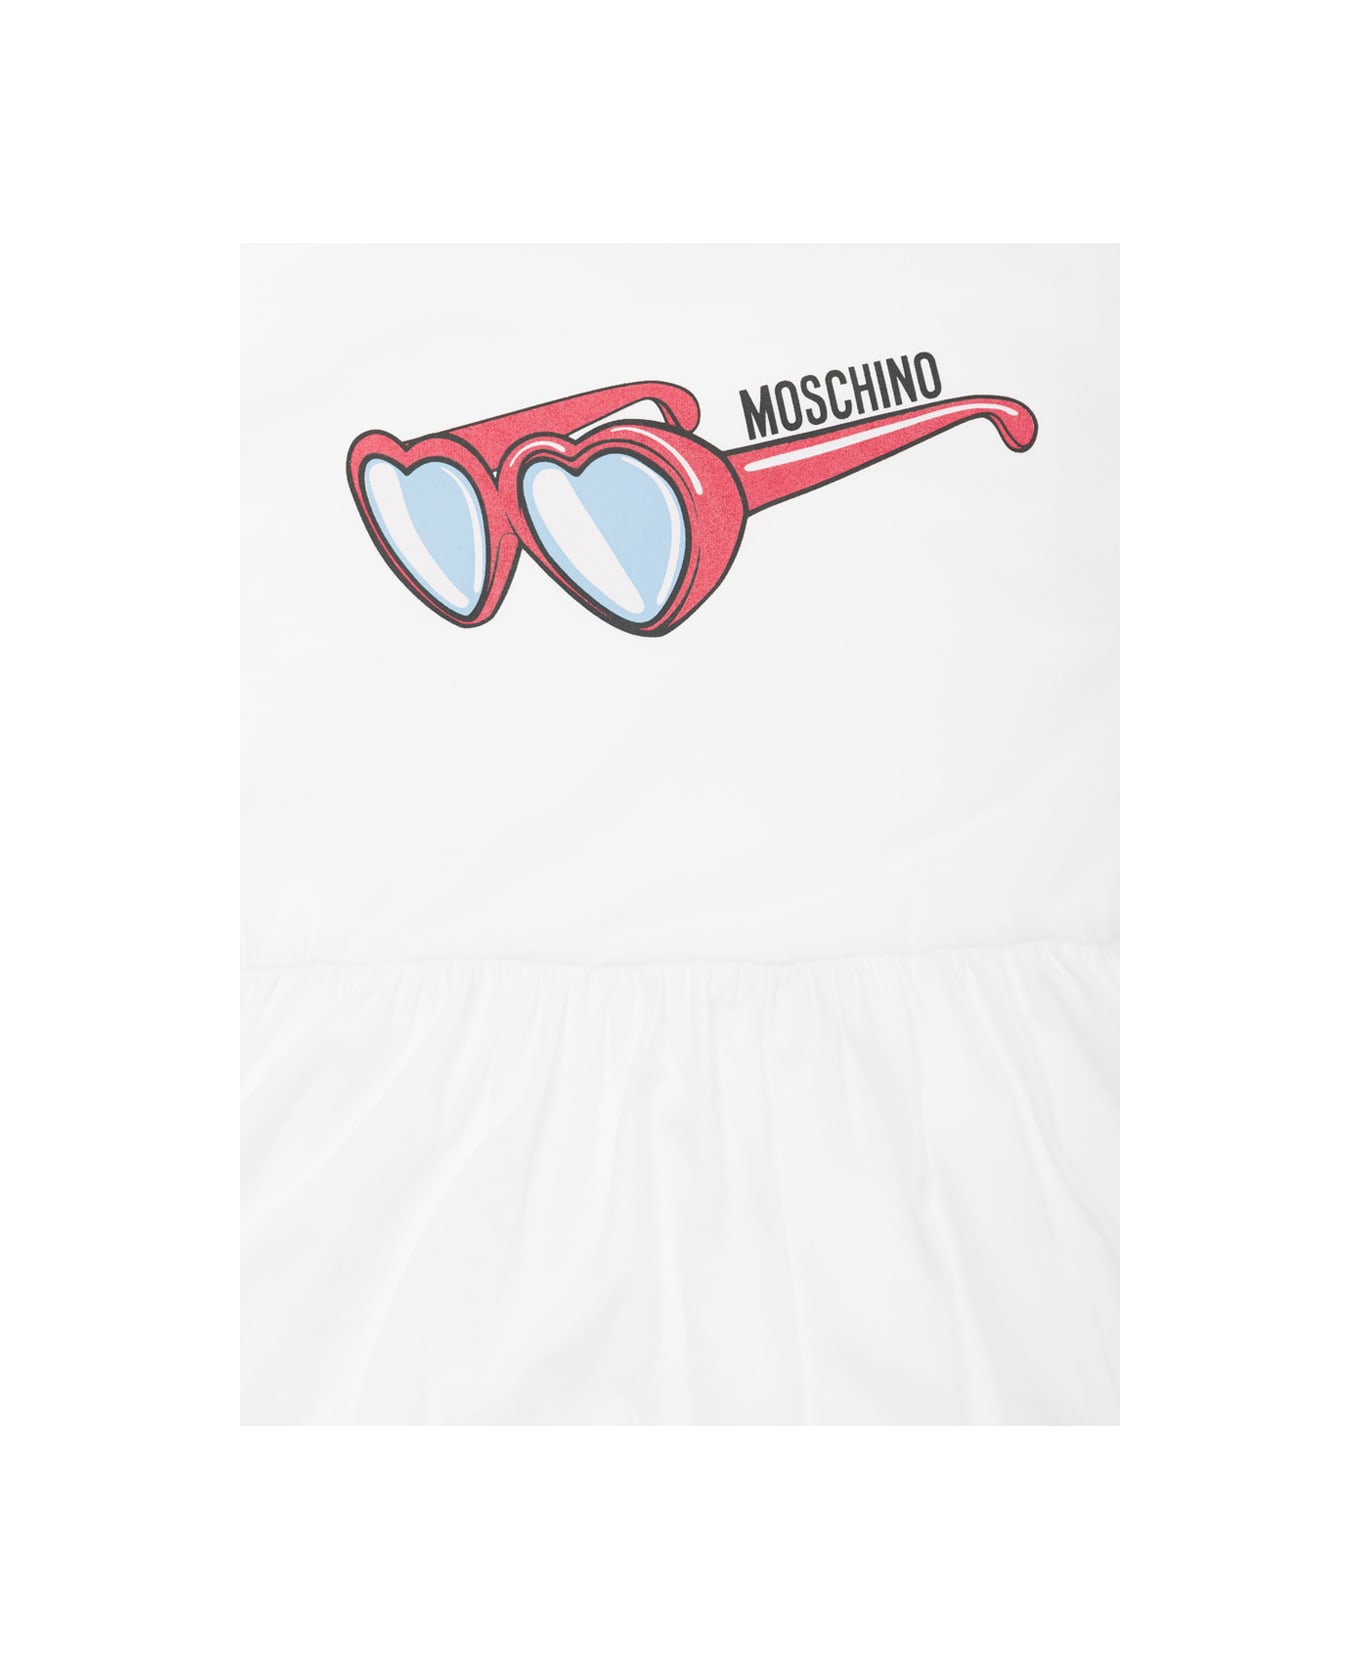 Moschino White Flounced Dress With Sunglasses Print In Stretch Cotton Girl - White ワンピース＆ドレス